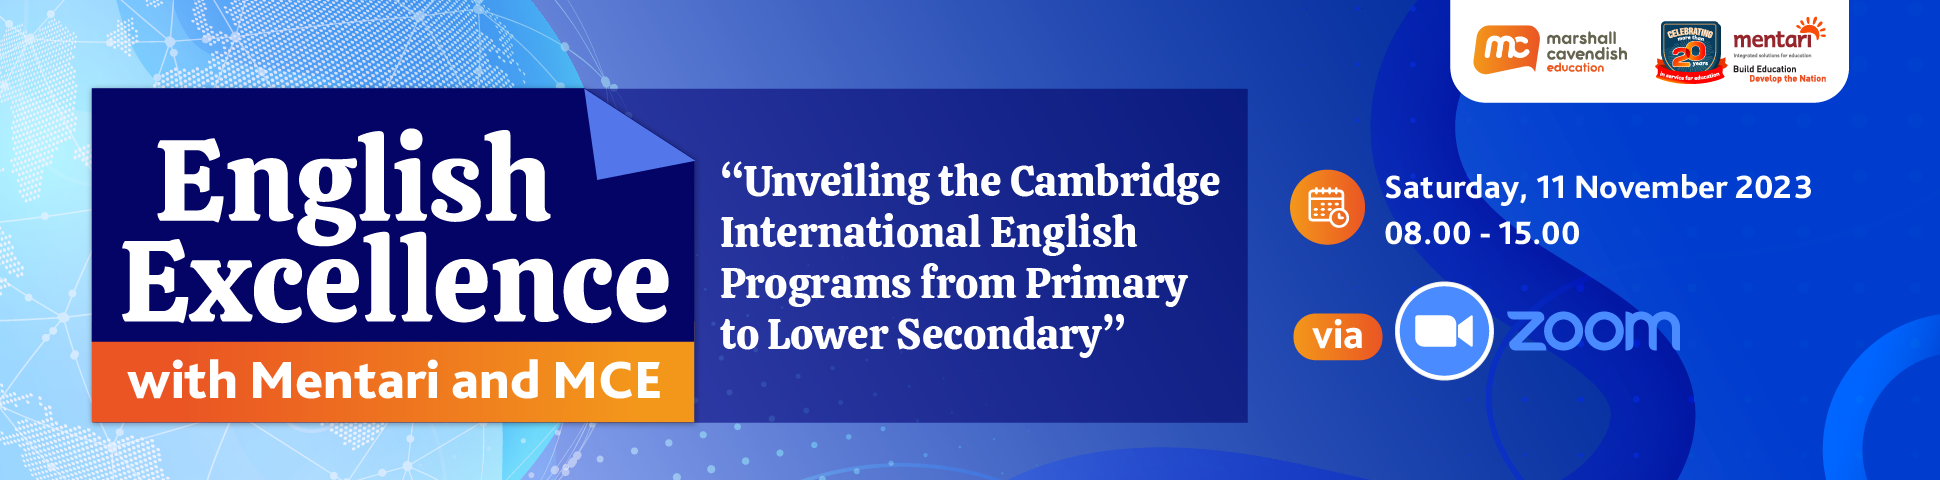 English Excellence: Unveiling the Cambridge International English Programs - Online